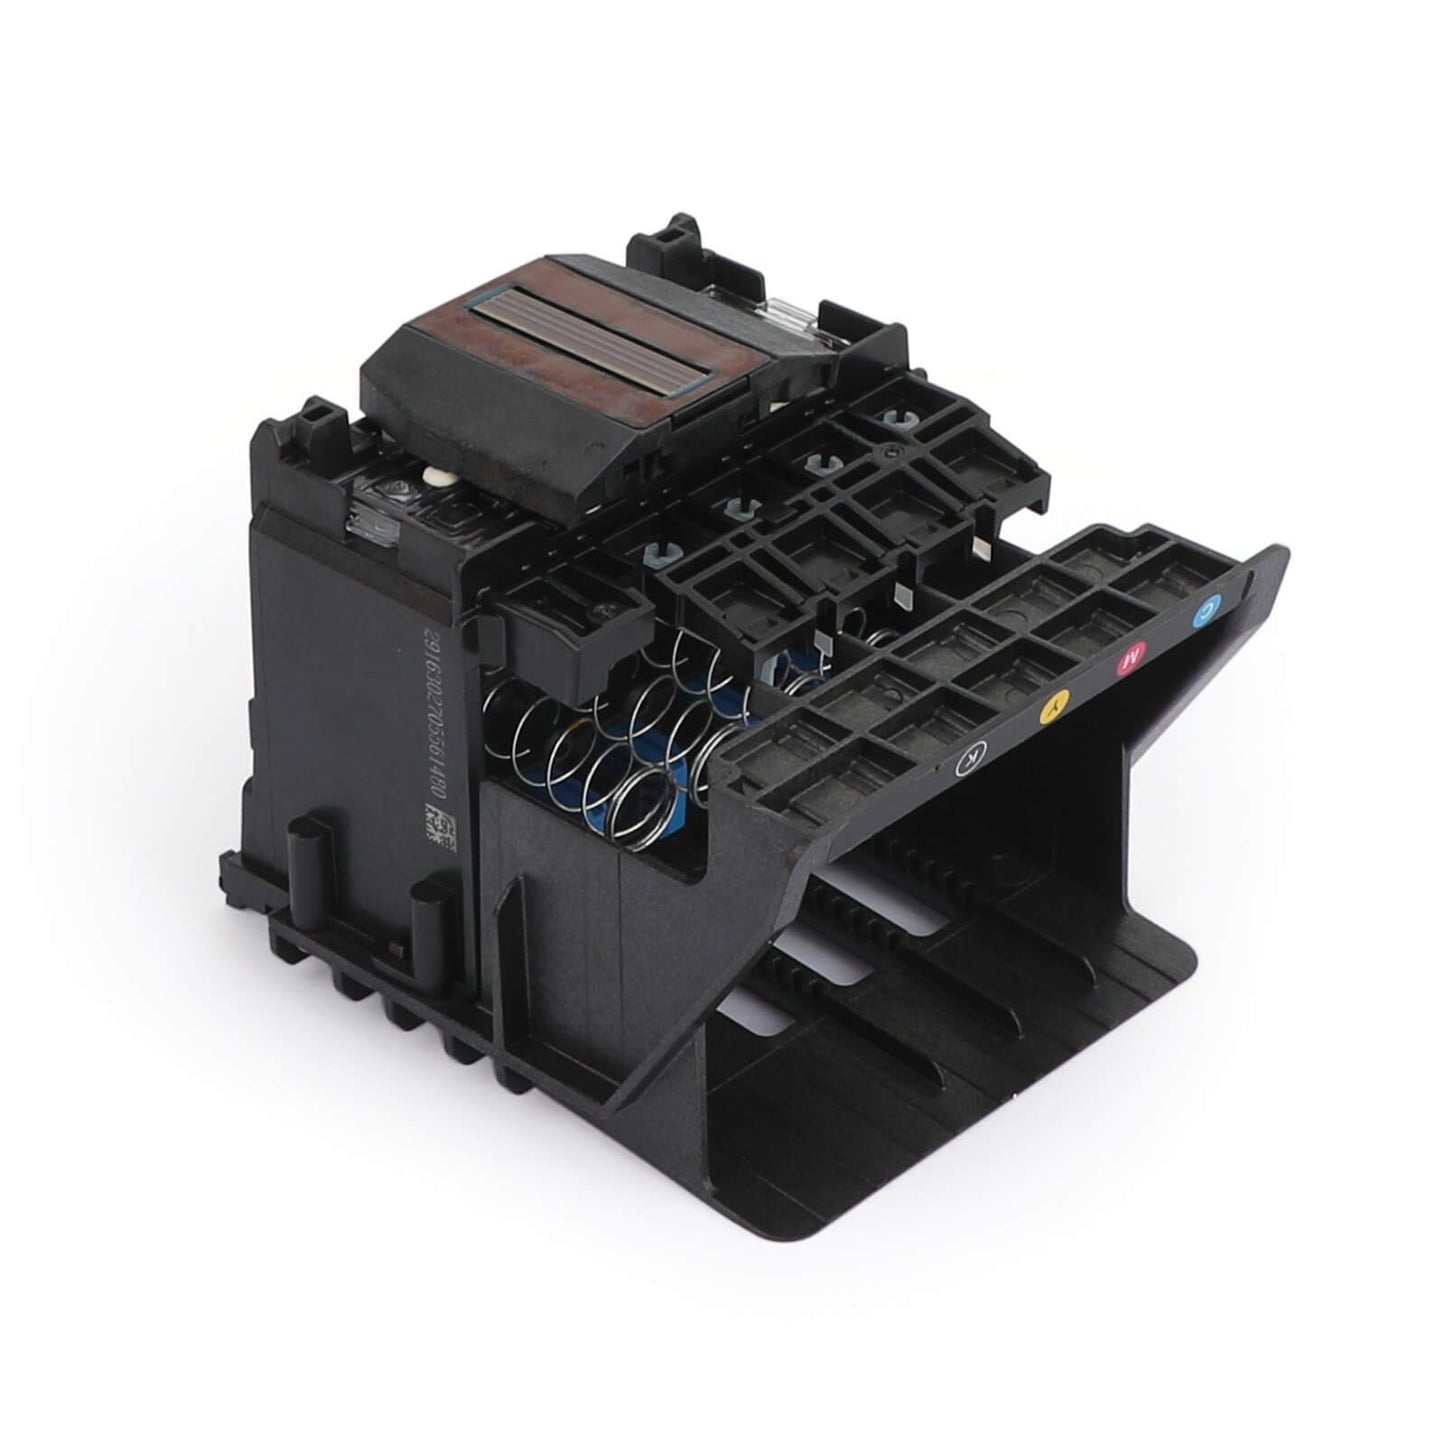 952 955 Printhead for HP Officejet Pro 8710 8216 7740 7720 8720 8730 8740 8210